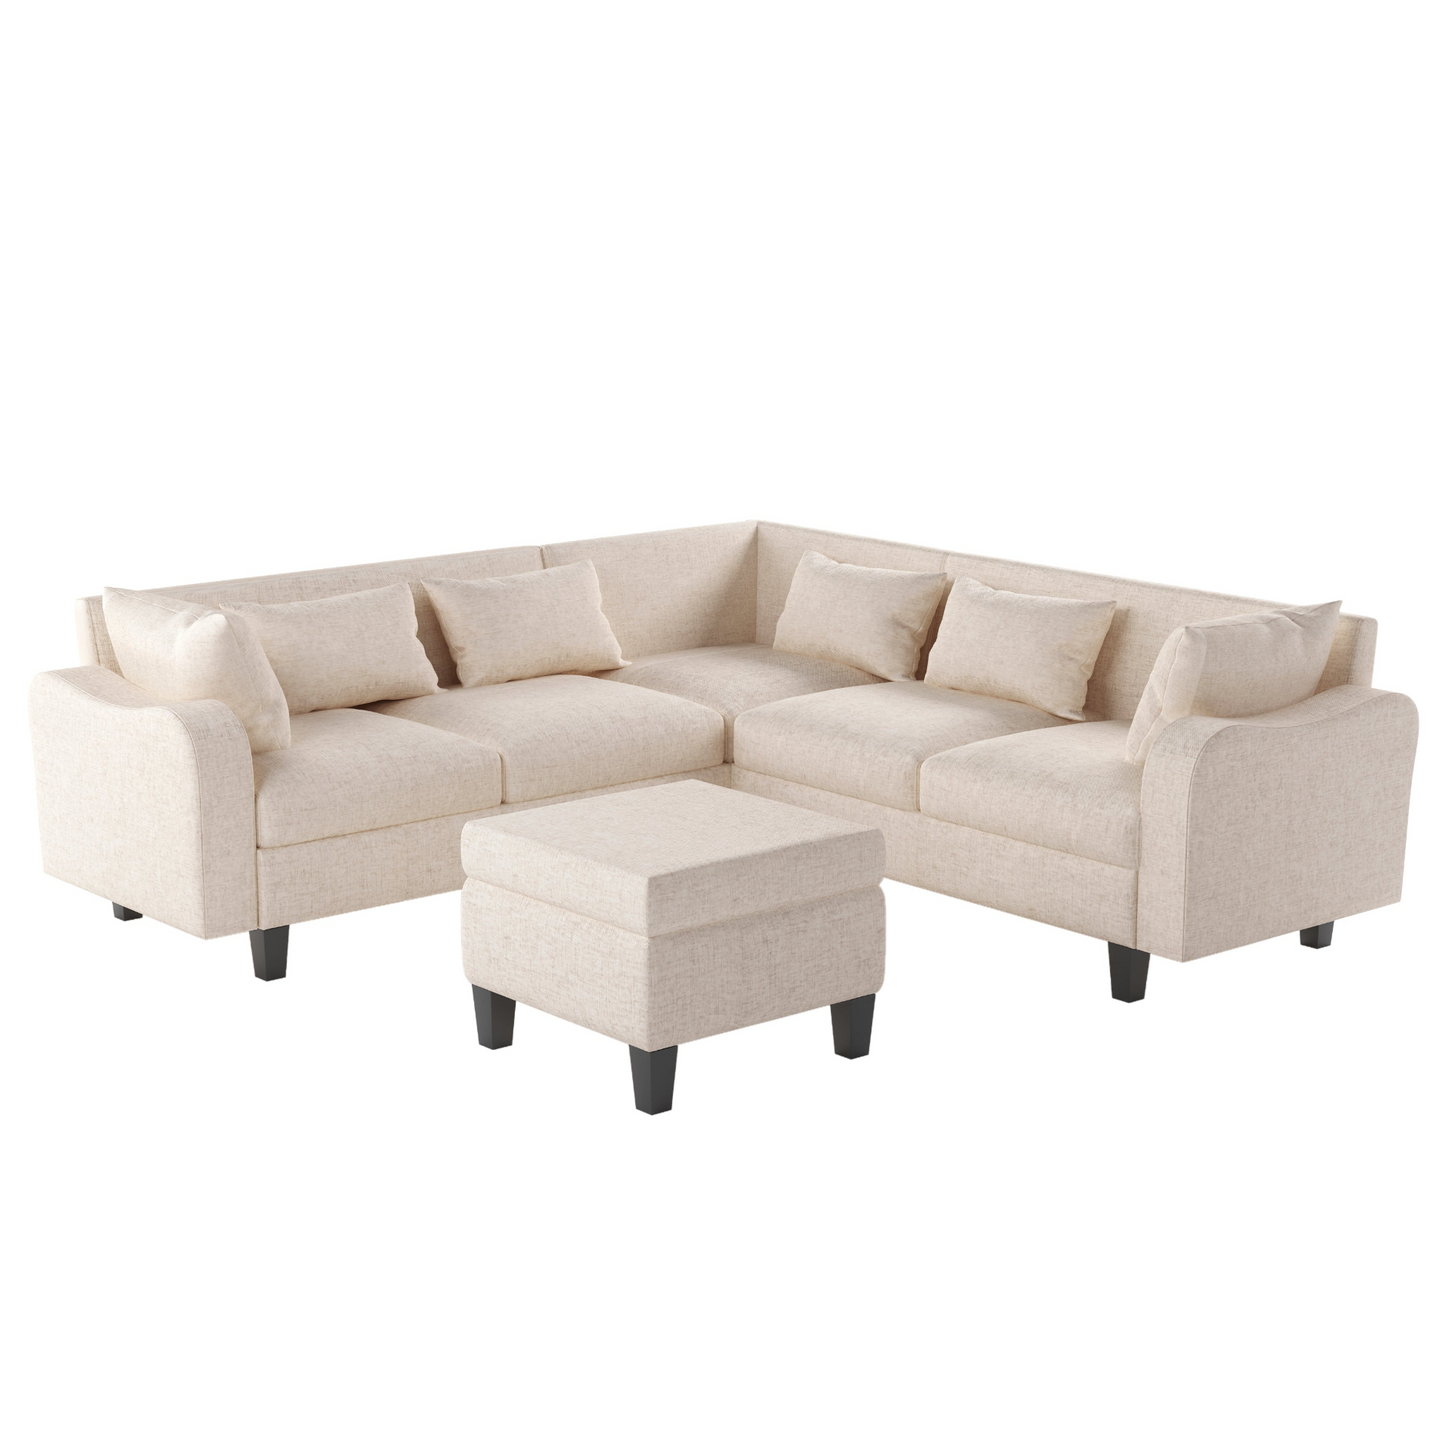 87" Modern Sectional Sofa with Coffee Table, 6-Seat Couch Set with Storage Ottoman, Goodies N Stuff